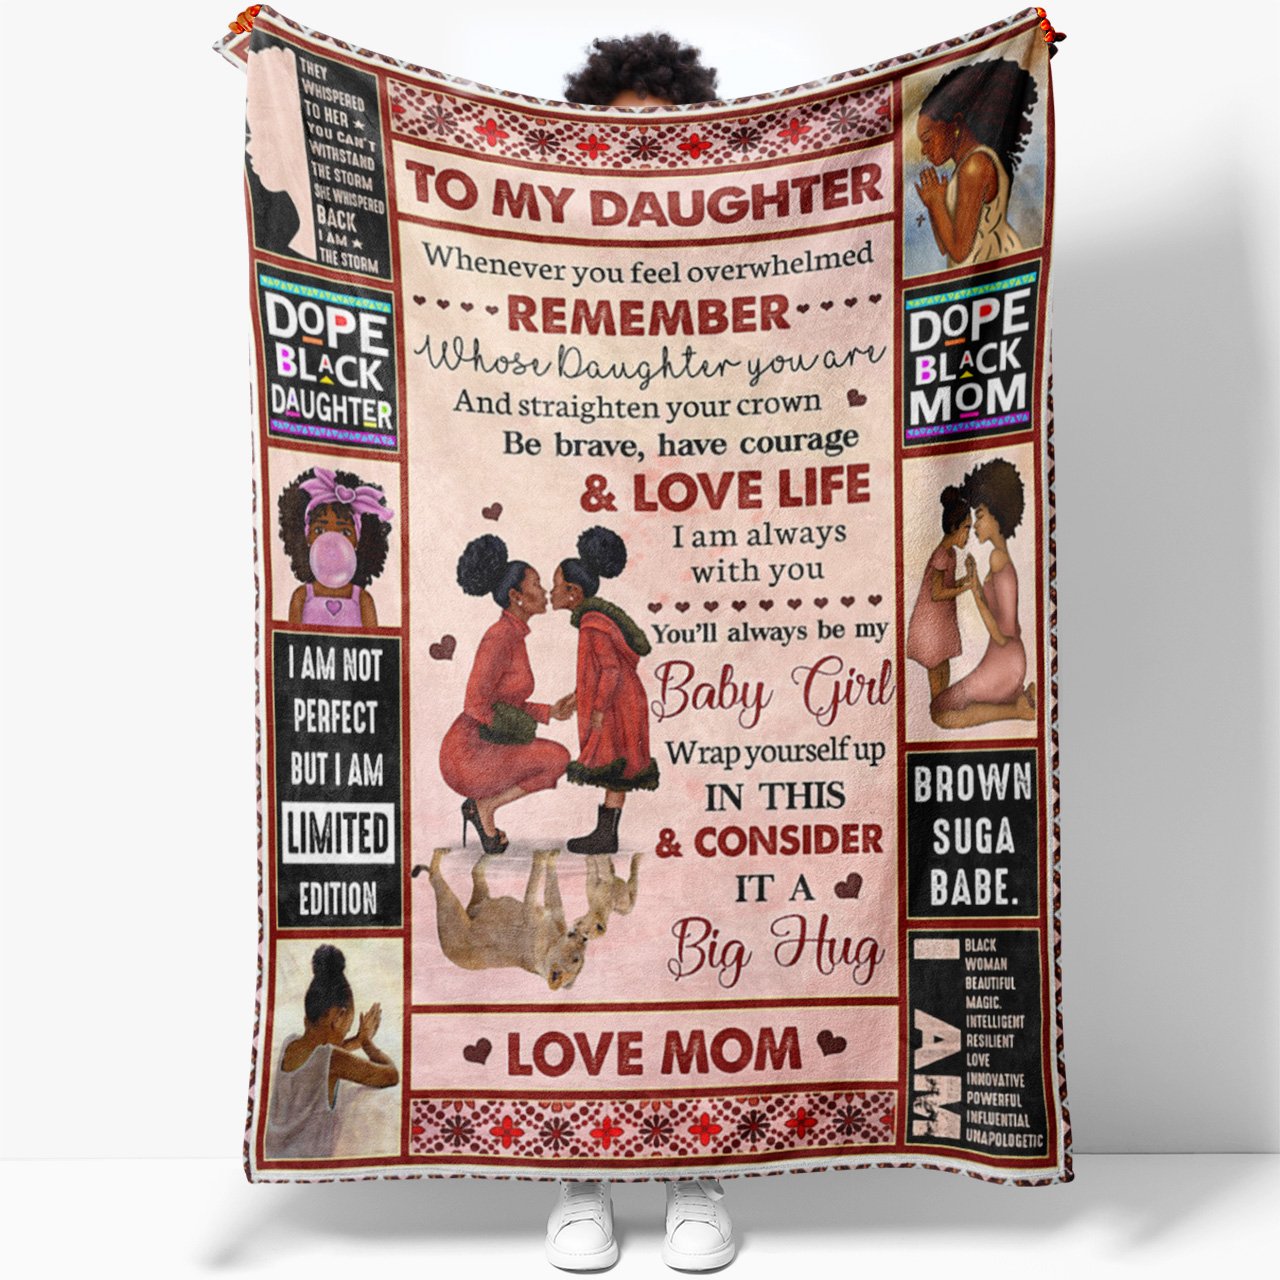 To My Daughter Blanket Gift, Whenever You Feel Overwhelmed Blanket from Black Mom, Birthday Gift Ideas Daughter, Christmas Gifts For Daughter